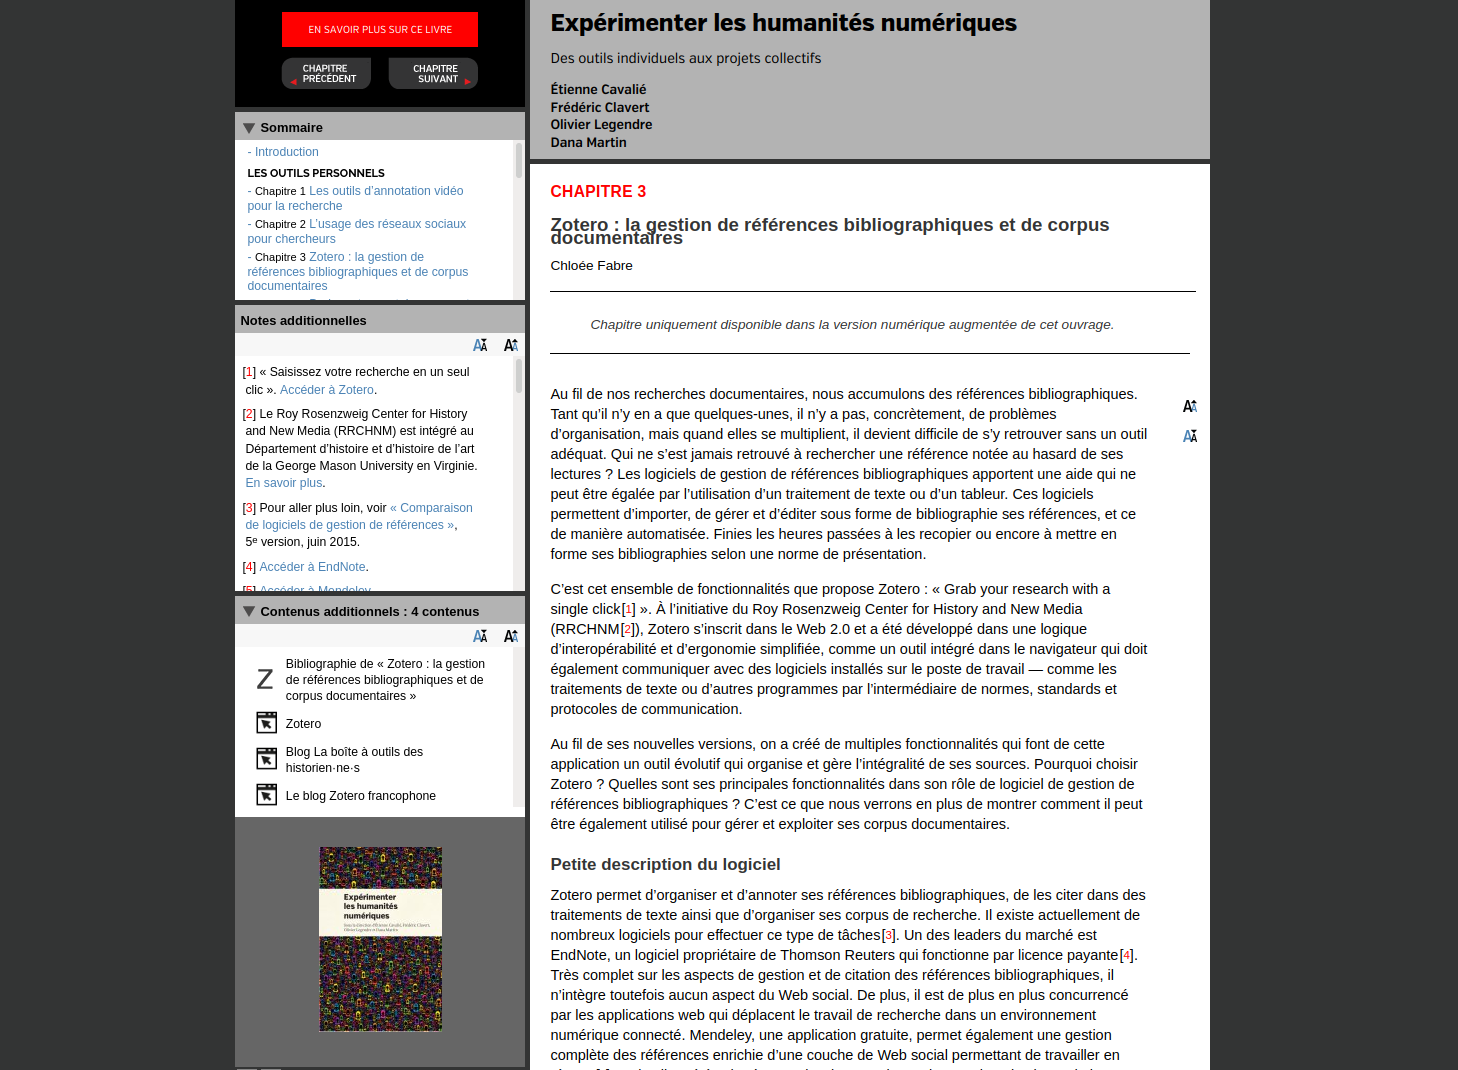 A screenshot of what an article looks like in the SPIP system. The article is written in French. The top of the screen shows the title, subtitle, and author names. The main body of the page has the full article with subheadings. The sidebar on the left side is separated into three panes. The top has navigational links for the article, the middle has the article’s footnotes, and the bottom has the enriched metadata